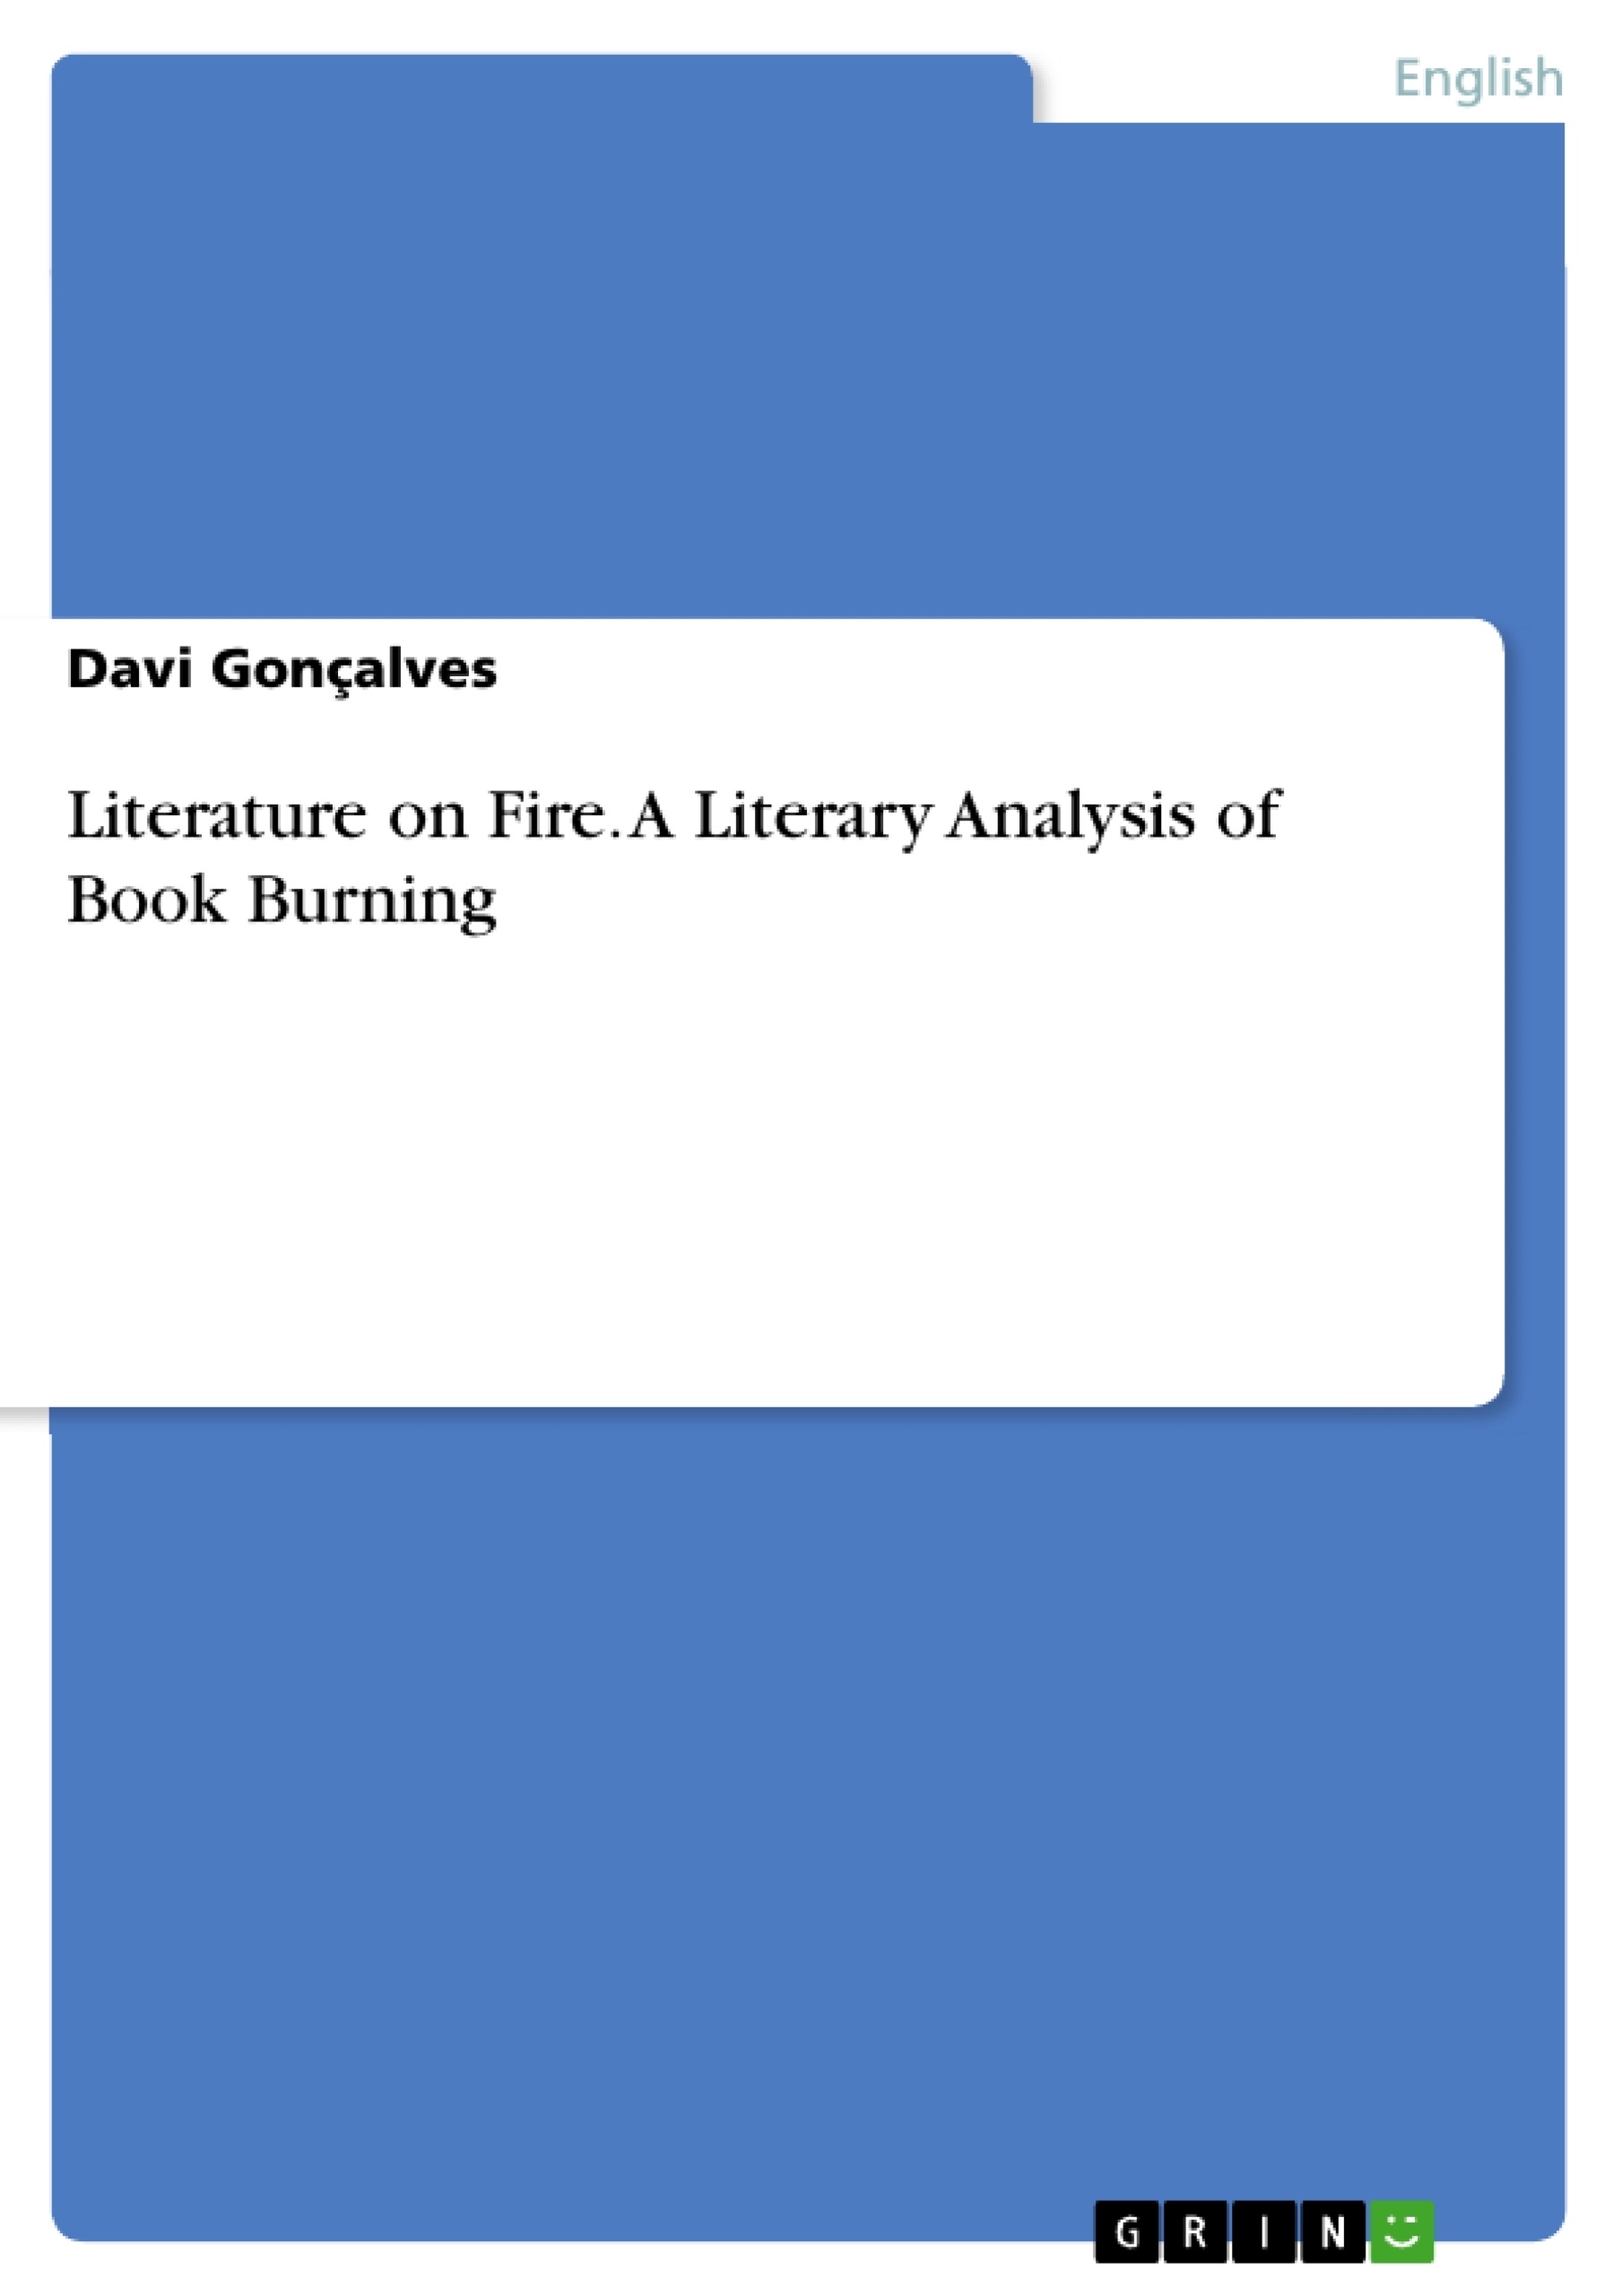 Titre: Literature on Fire. A Literary Analysis of Book Burning